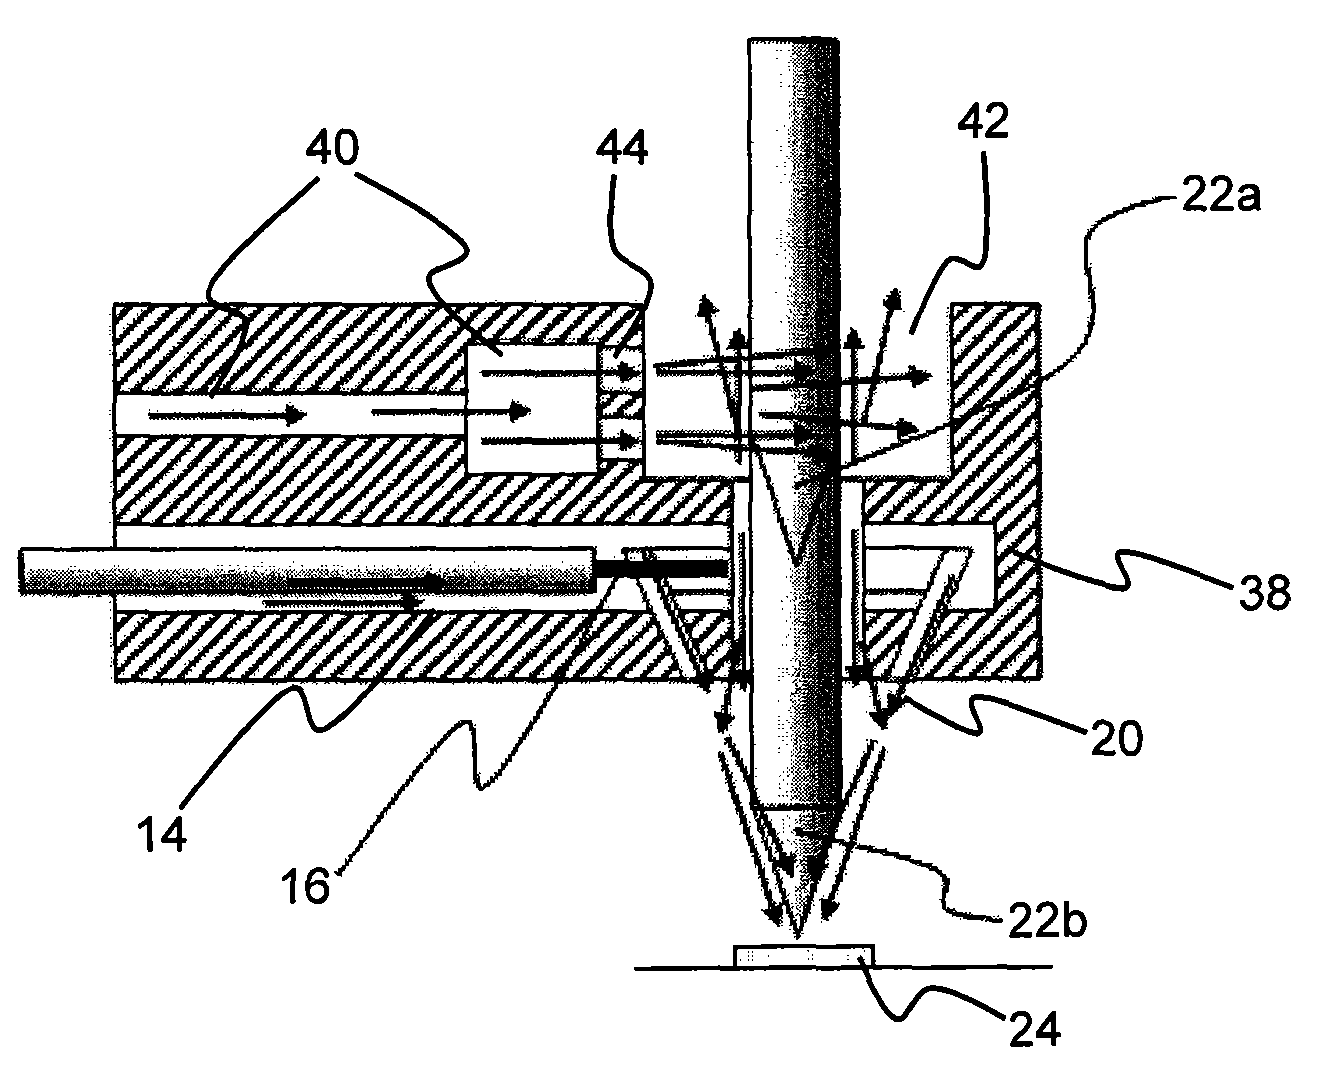 Apparatus for increasing coverage of shielding gas during wire bonding